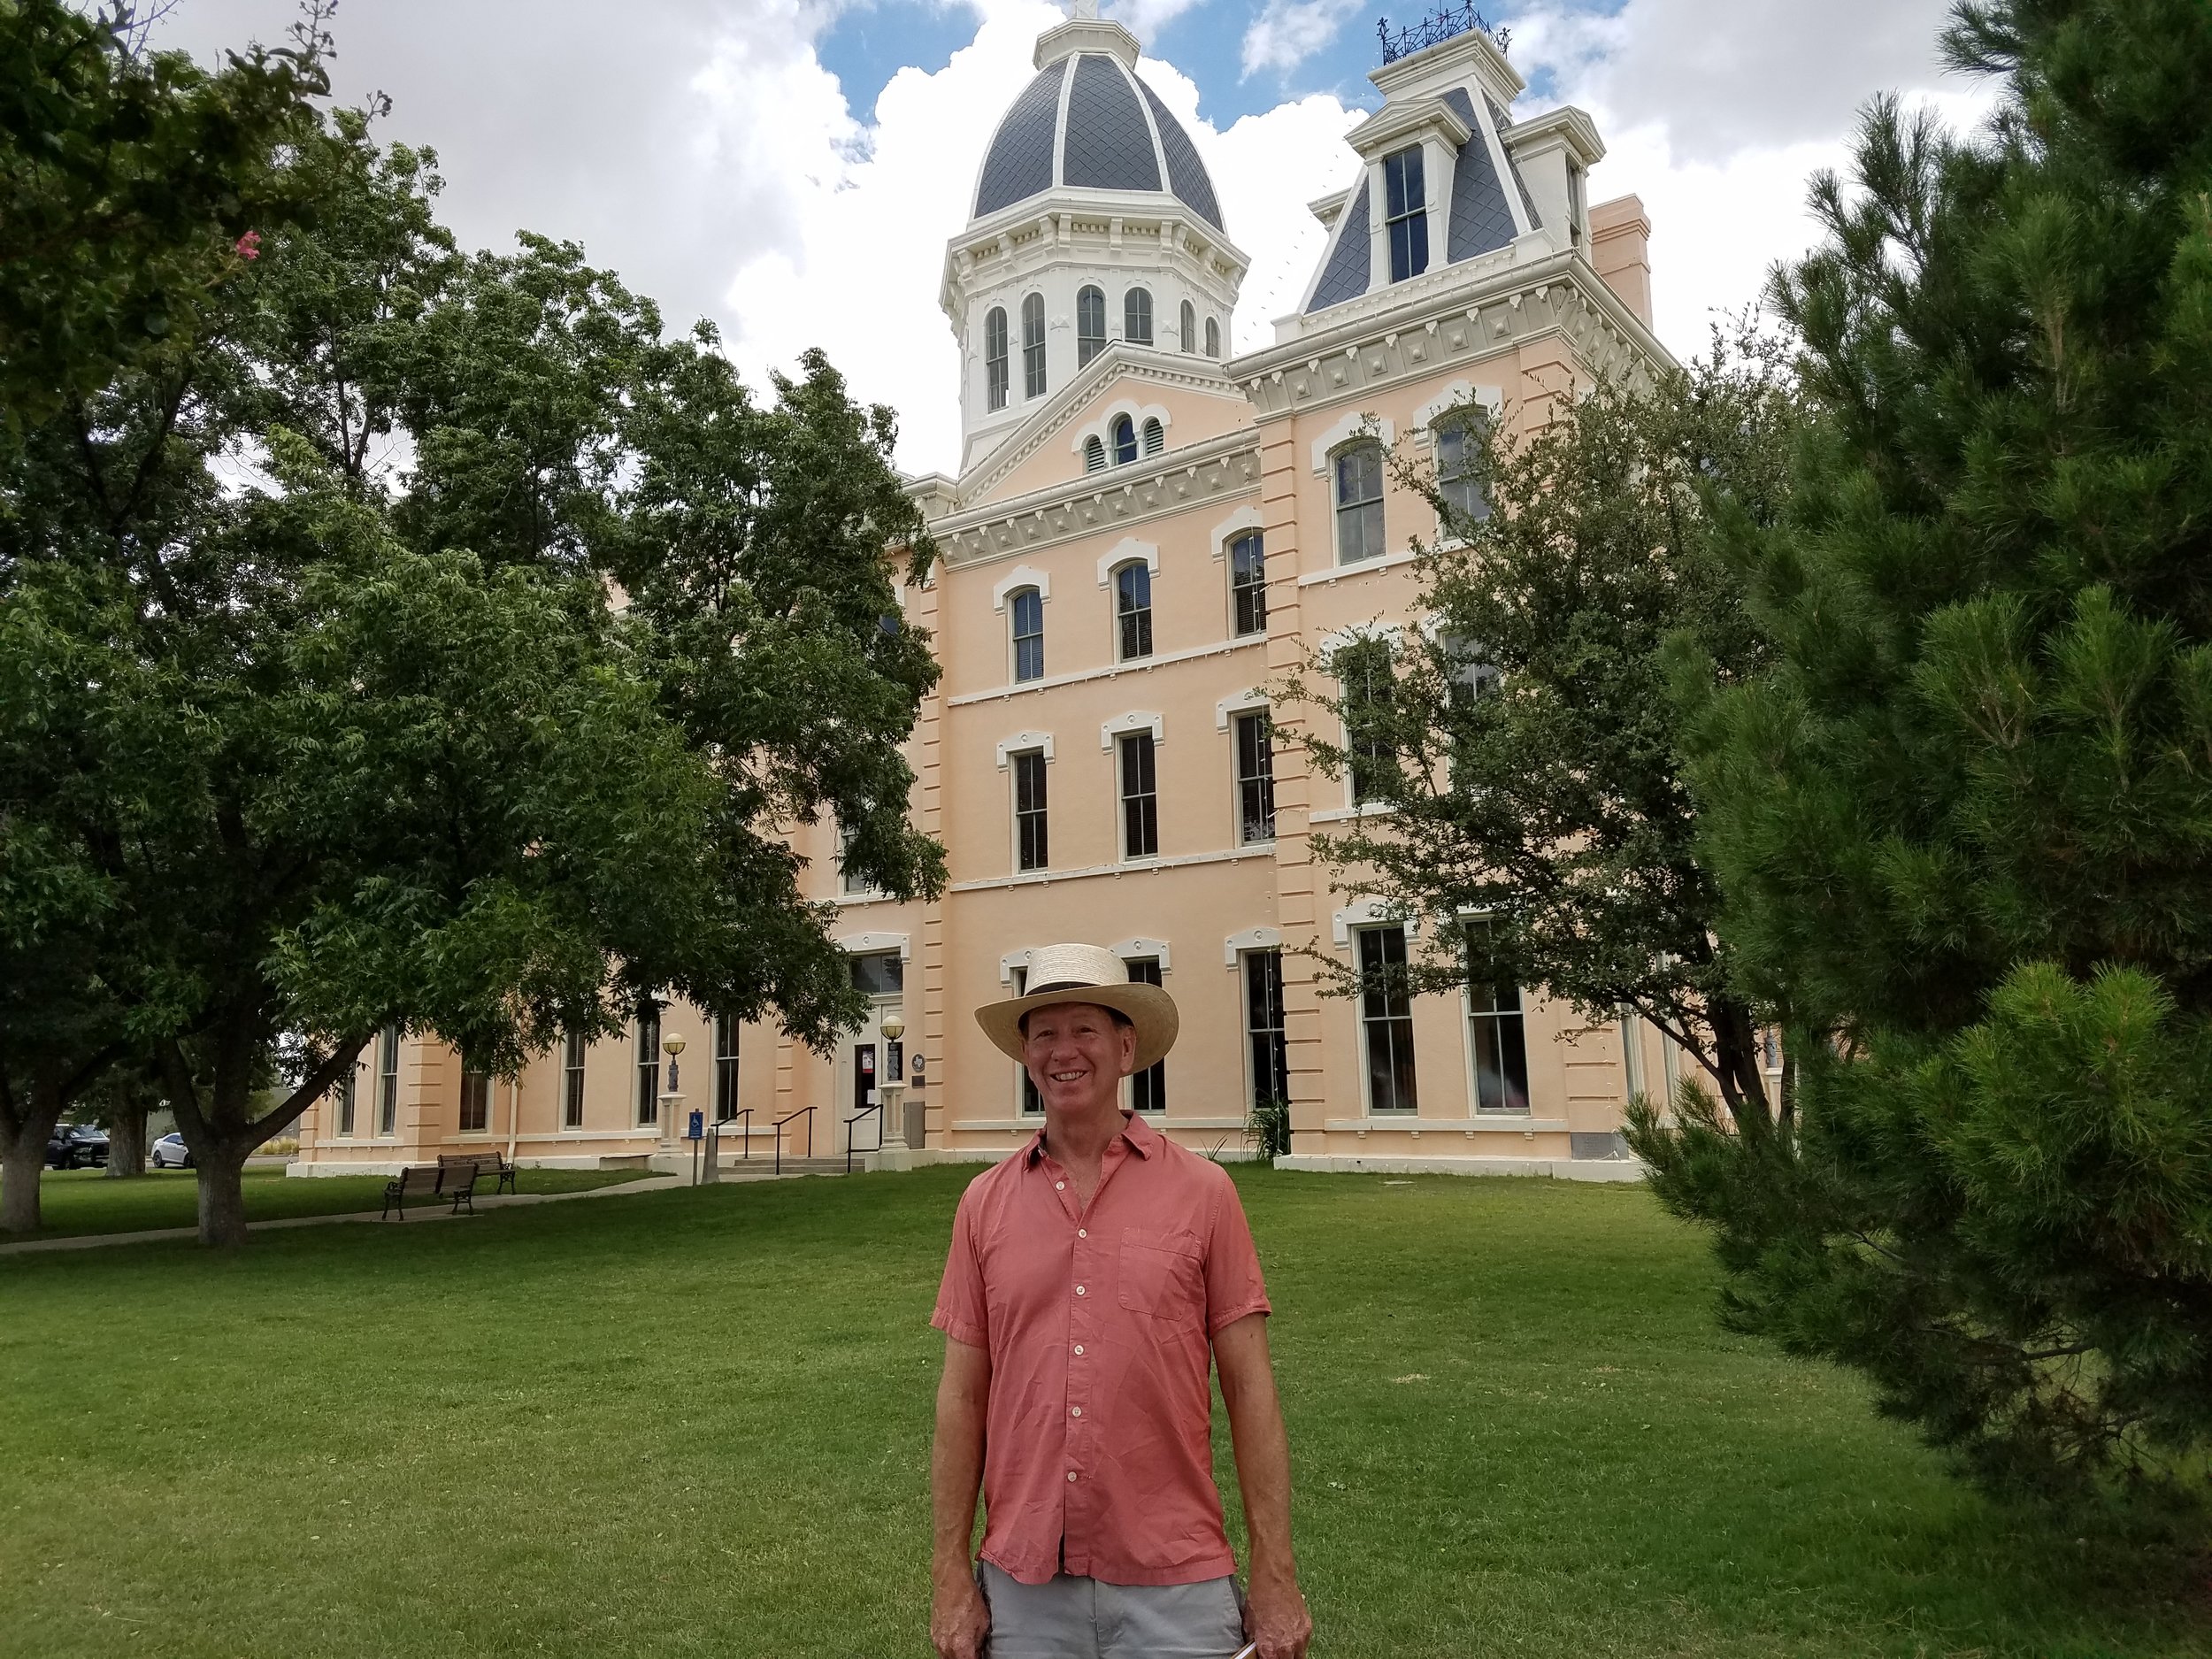 My friend Don Seaver at the Marfa court house